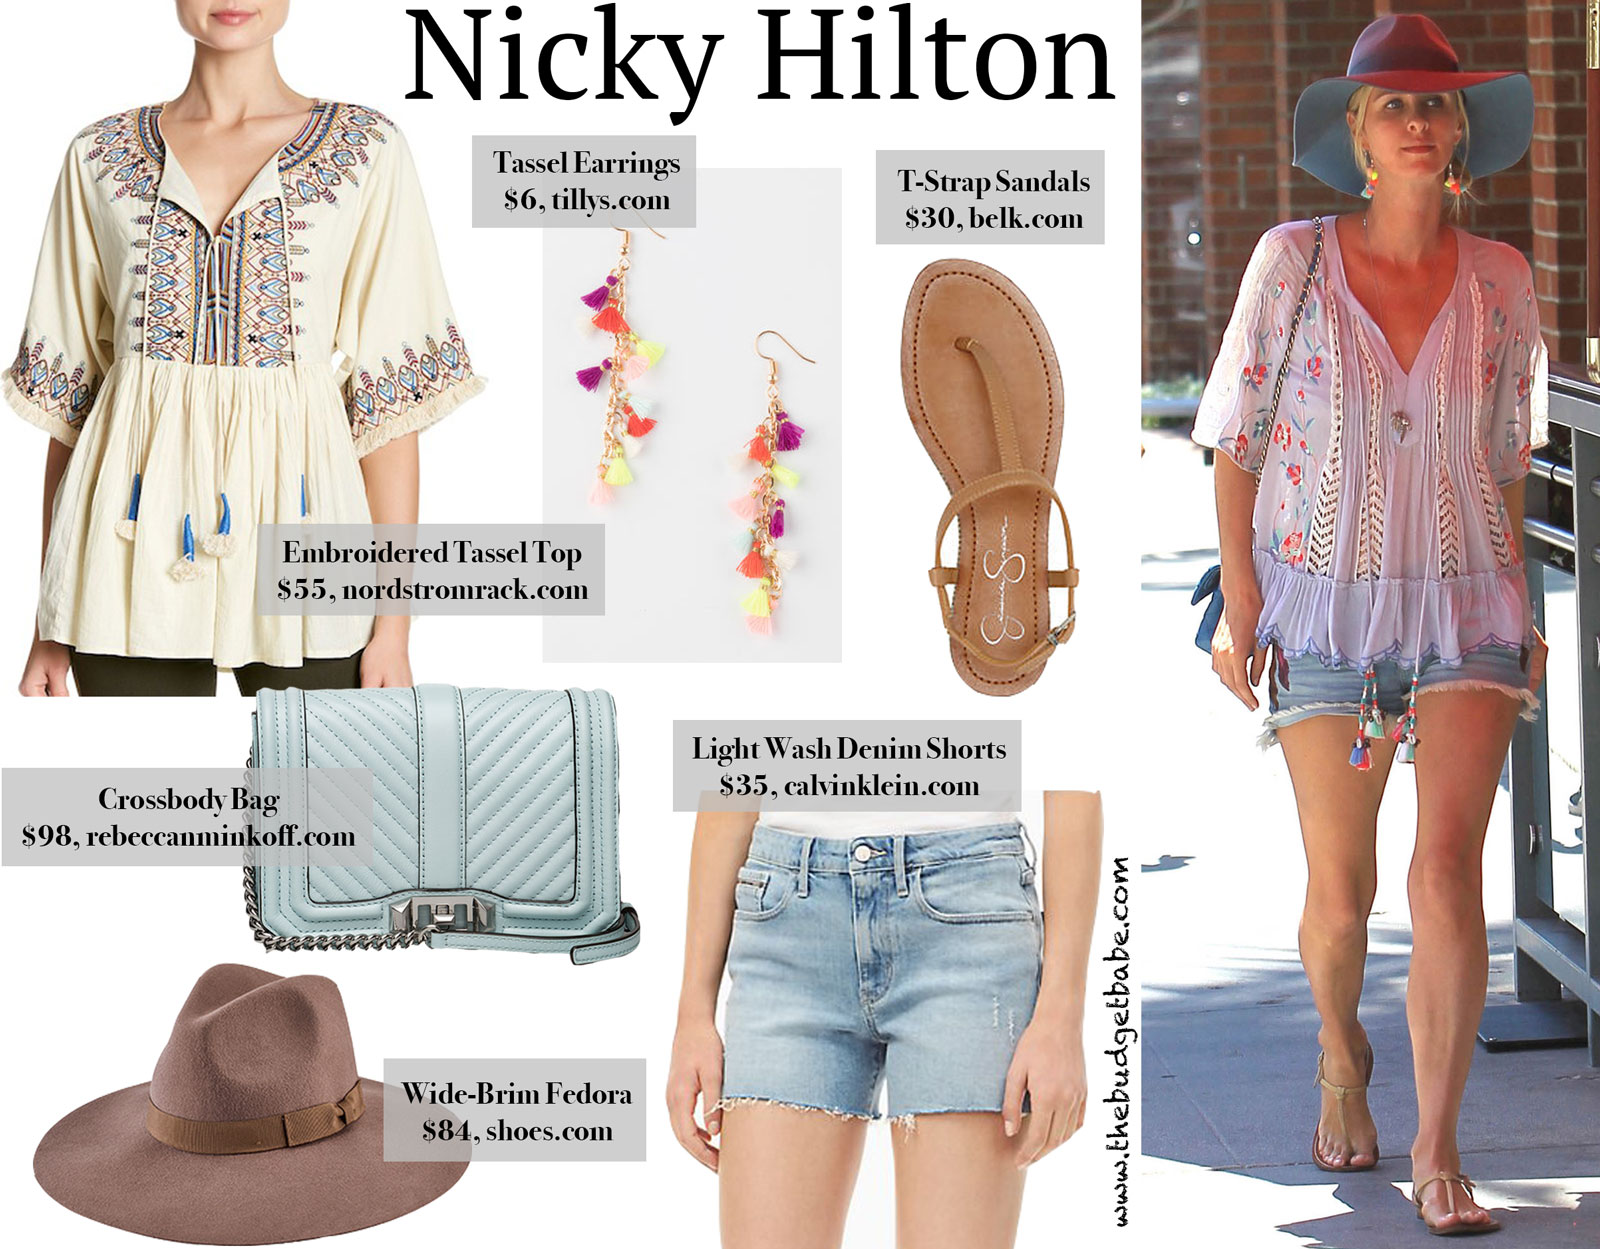 Nicky Hilton Embroidered Tassel Top Look for Less